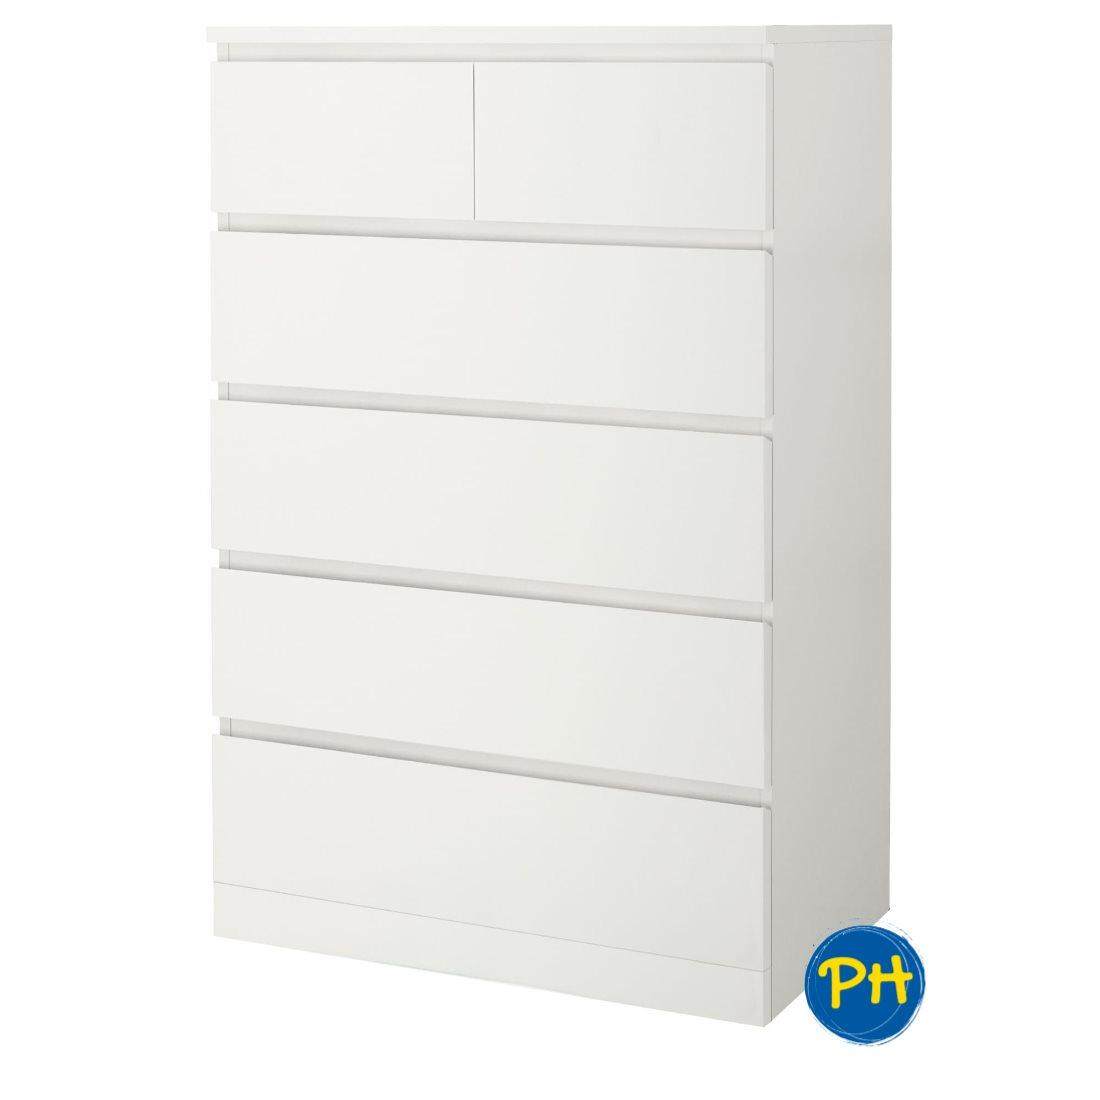 Ikea Malm 403 546 45 Classic Bedroom Dresser With 6 Drawers White